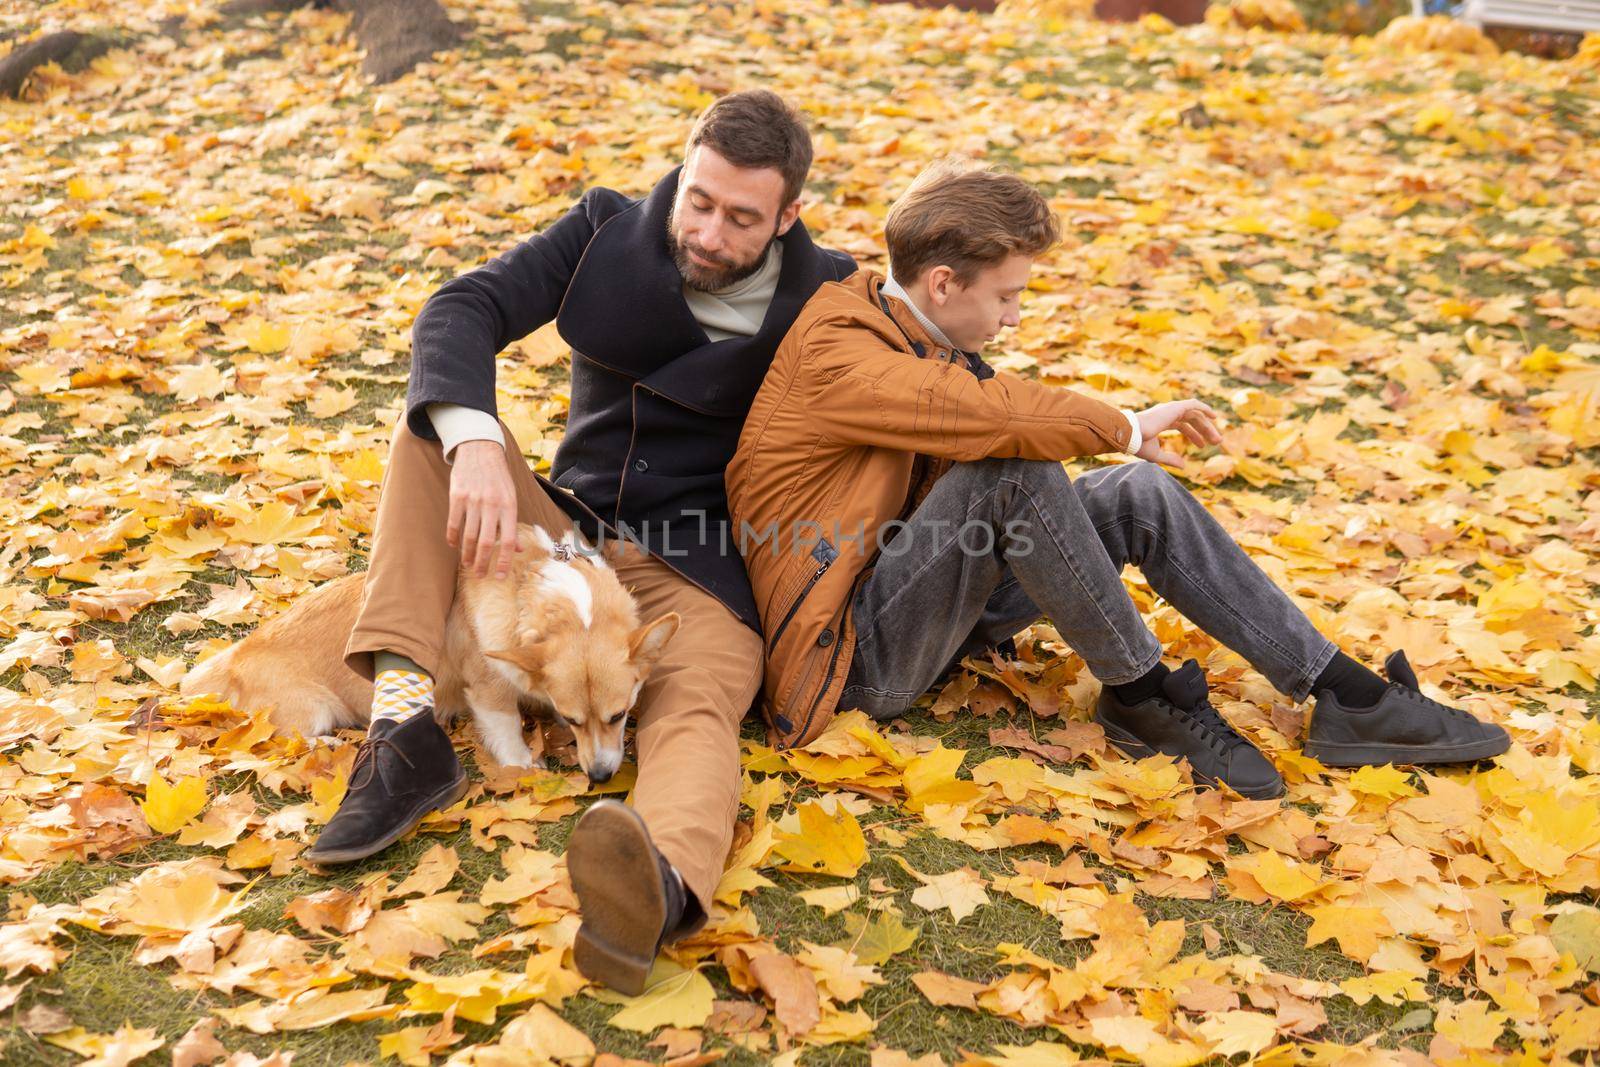 Father and son with a pet on a walk in the autumn park.